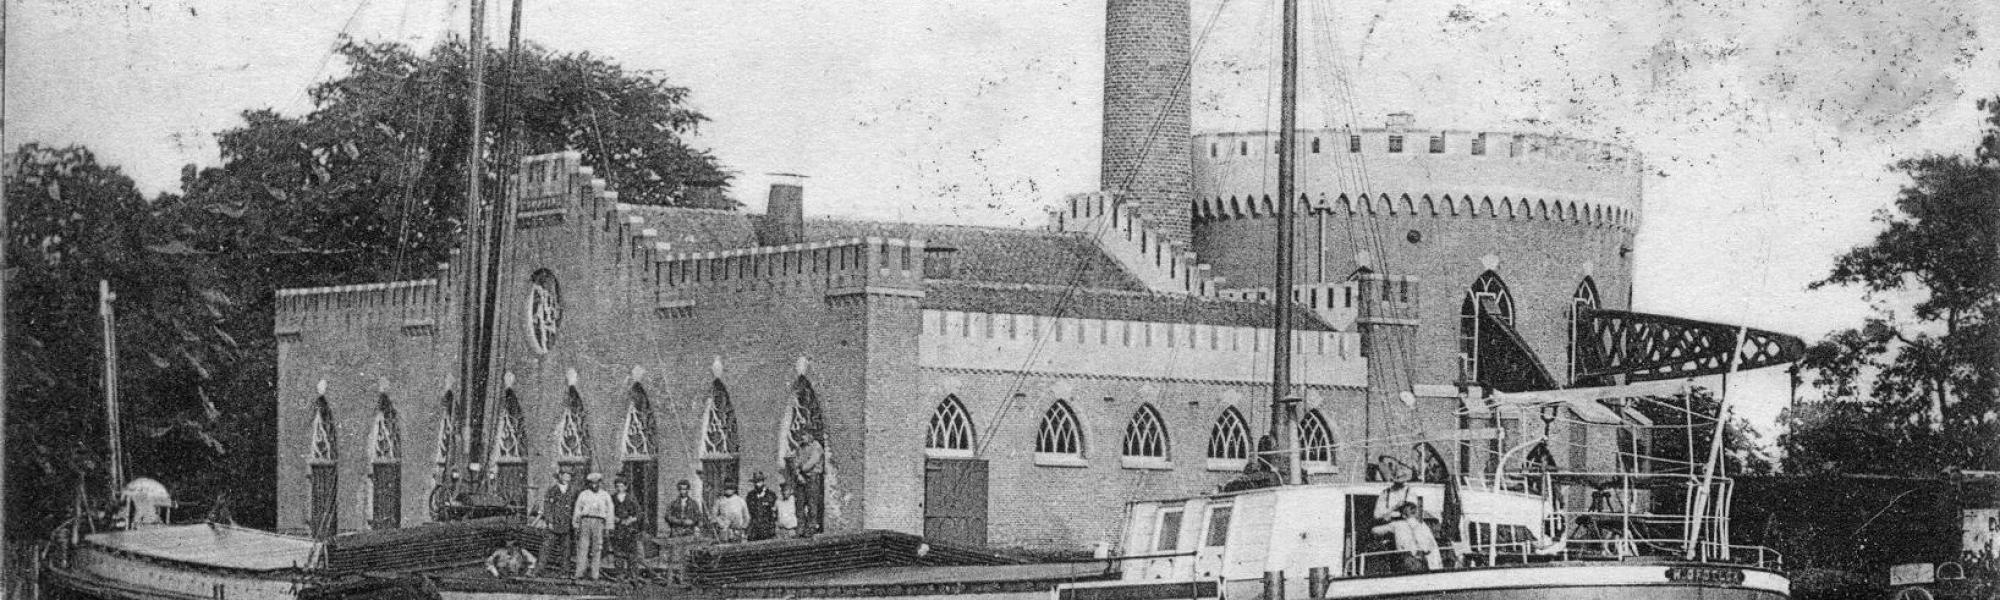 Historical image of pumping station Cruquius